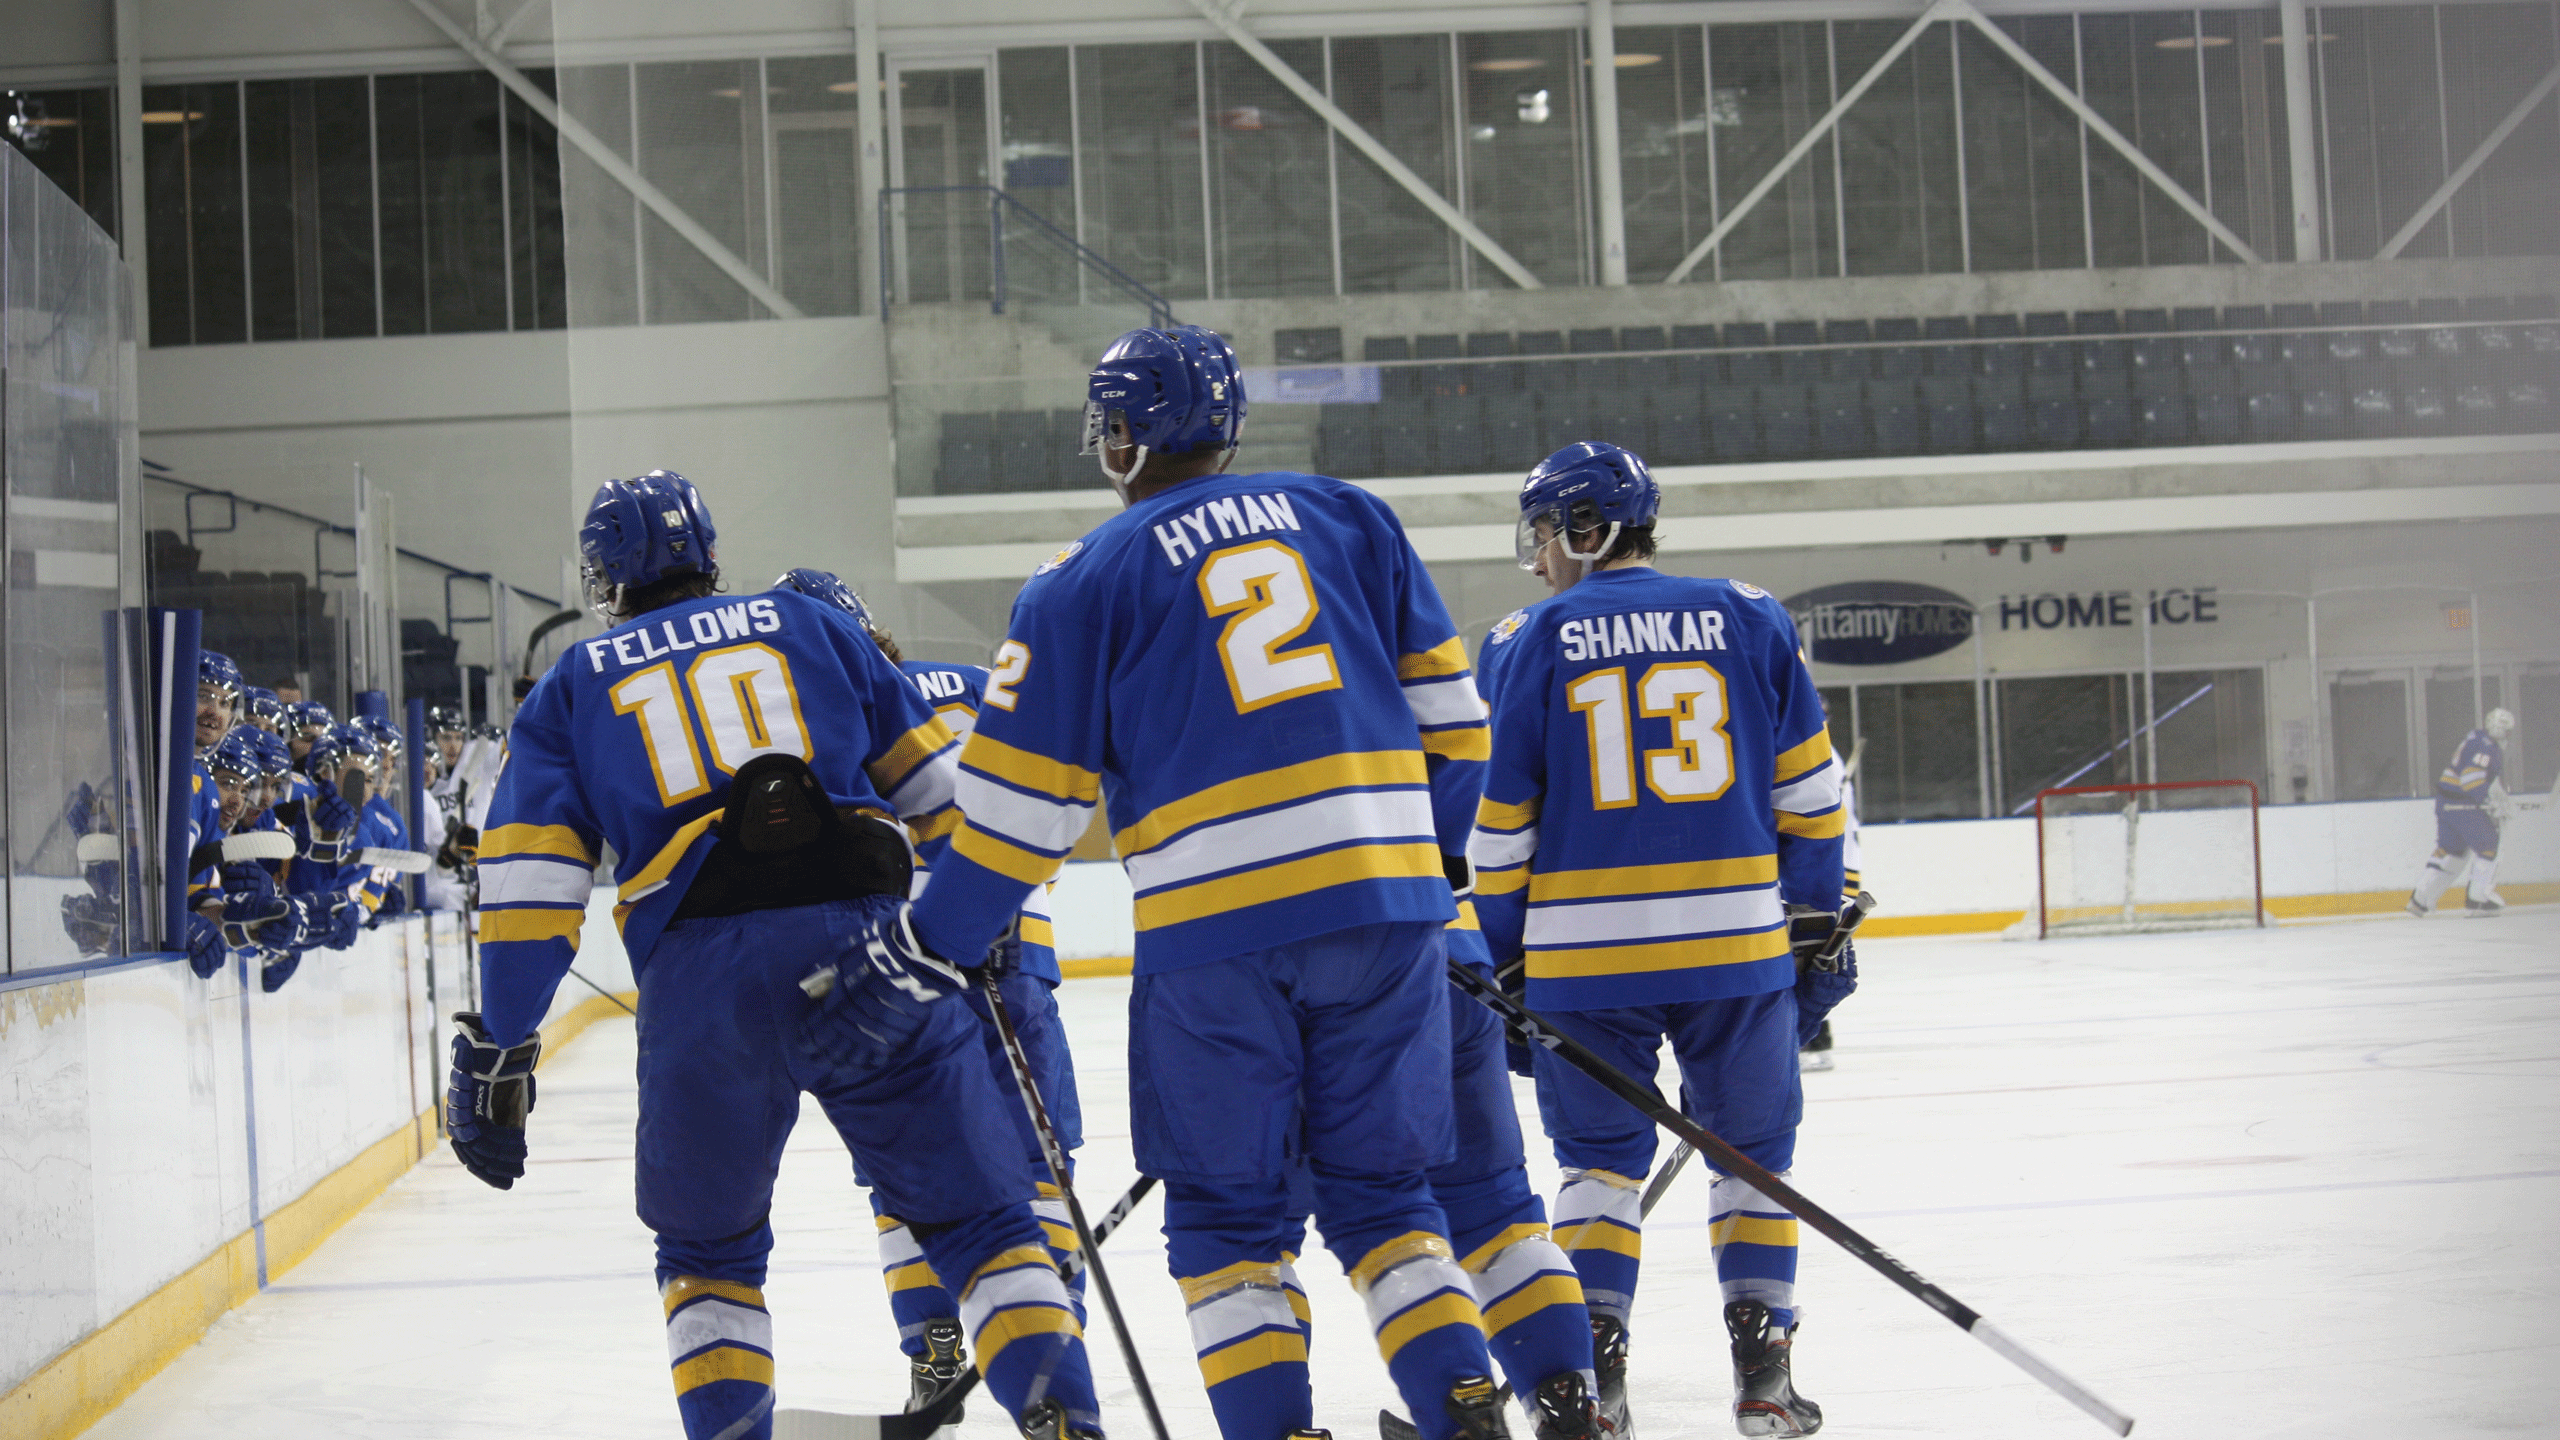 Rams mens hockey team ready for one last dance with current core